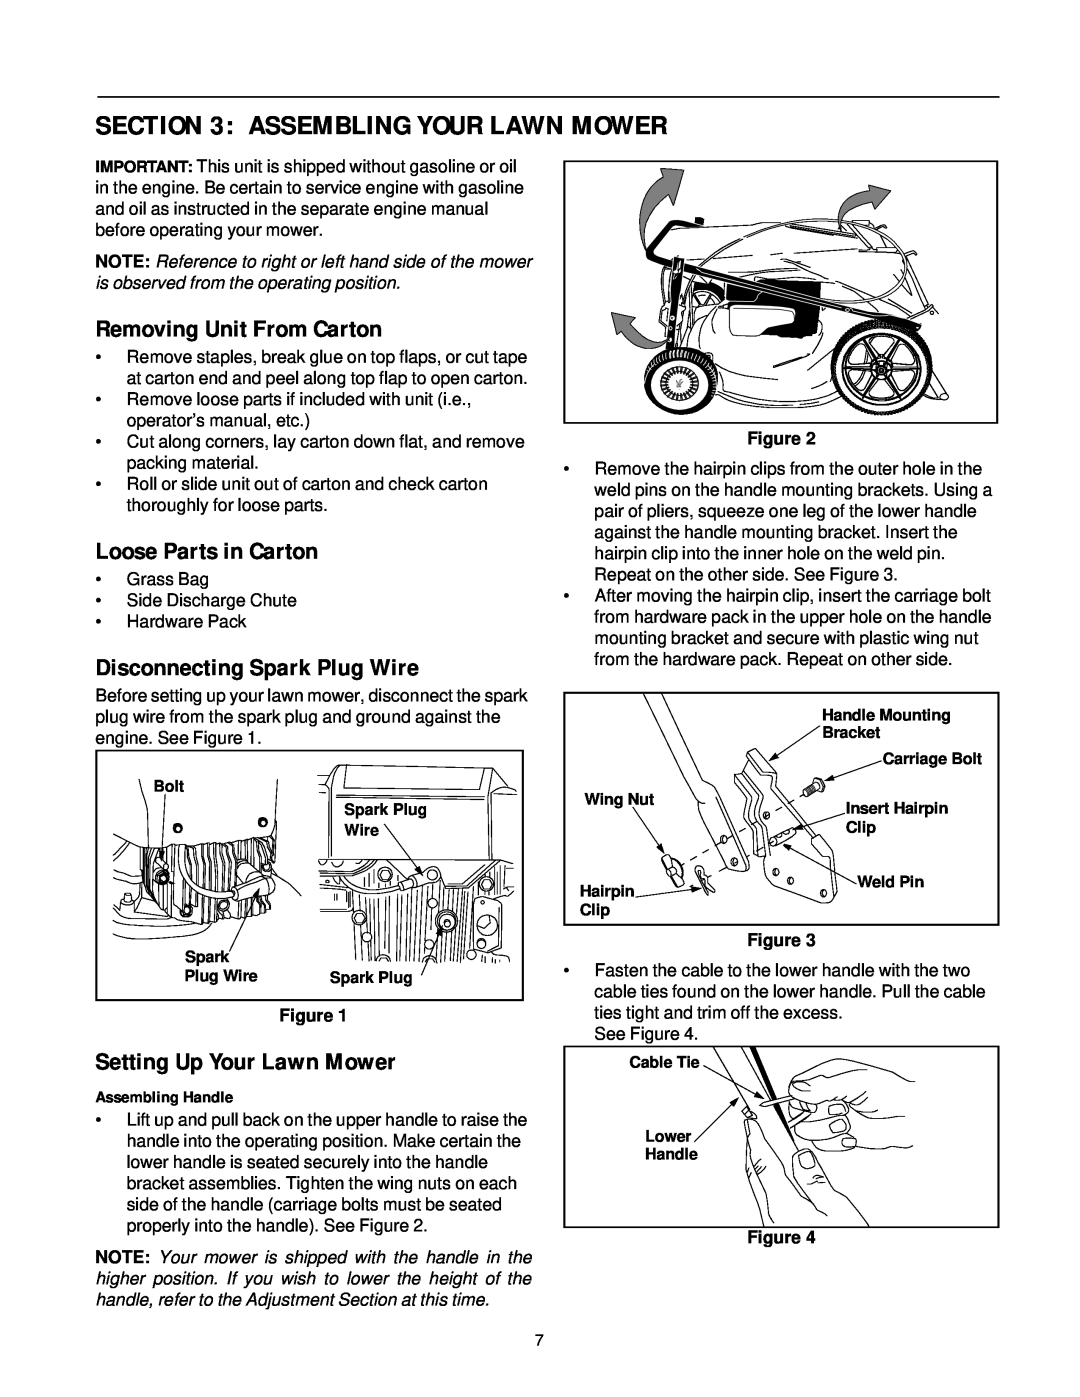 Bolens Series 540 Assembling Your Lawn Mower, Removing Unit From Carton, Loose Parts in Carton, Setting Up Your Lawn Mower 